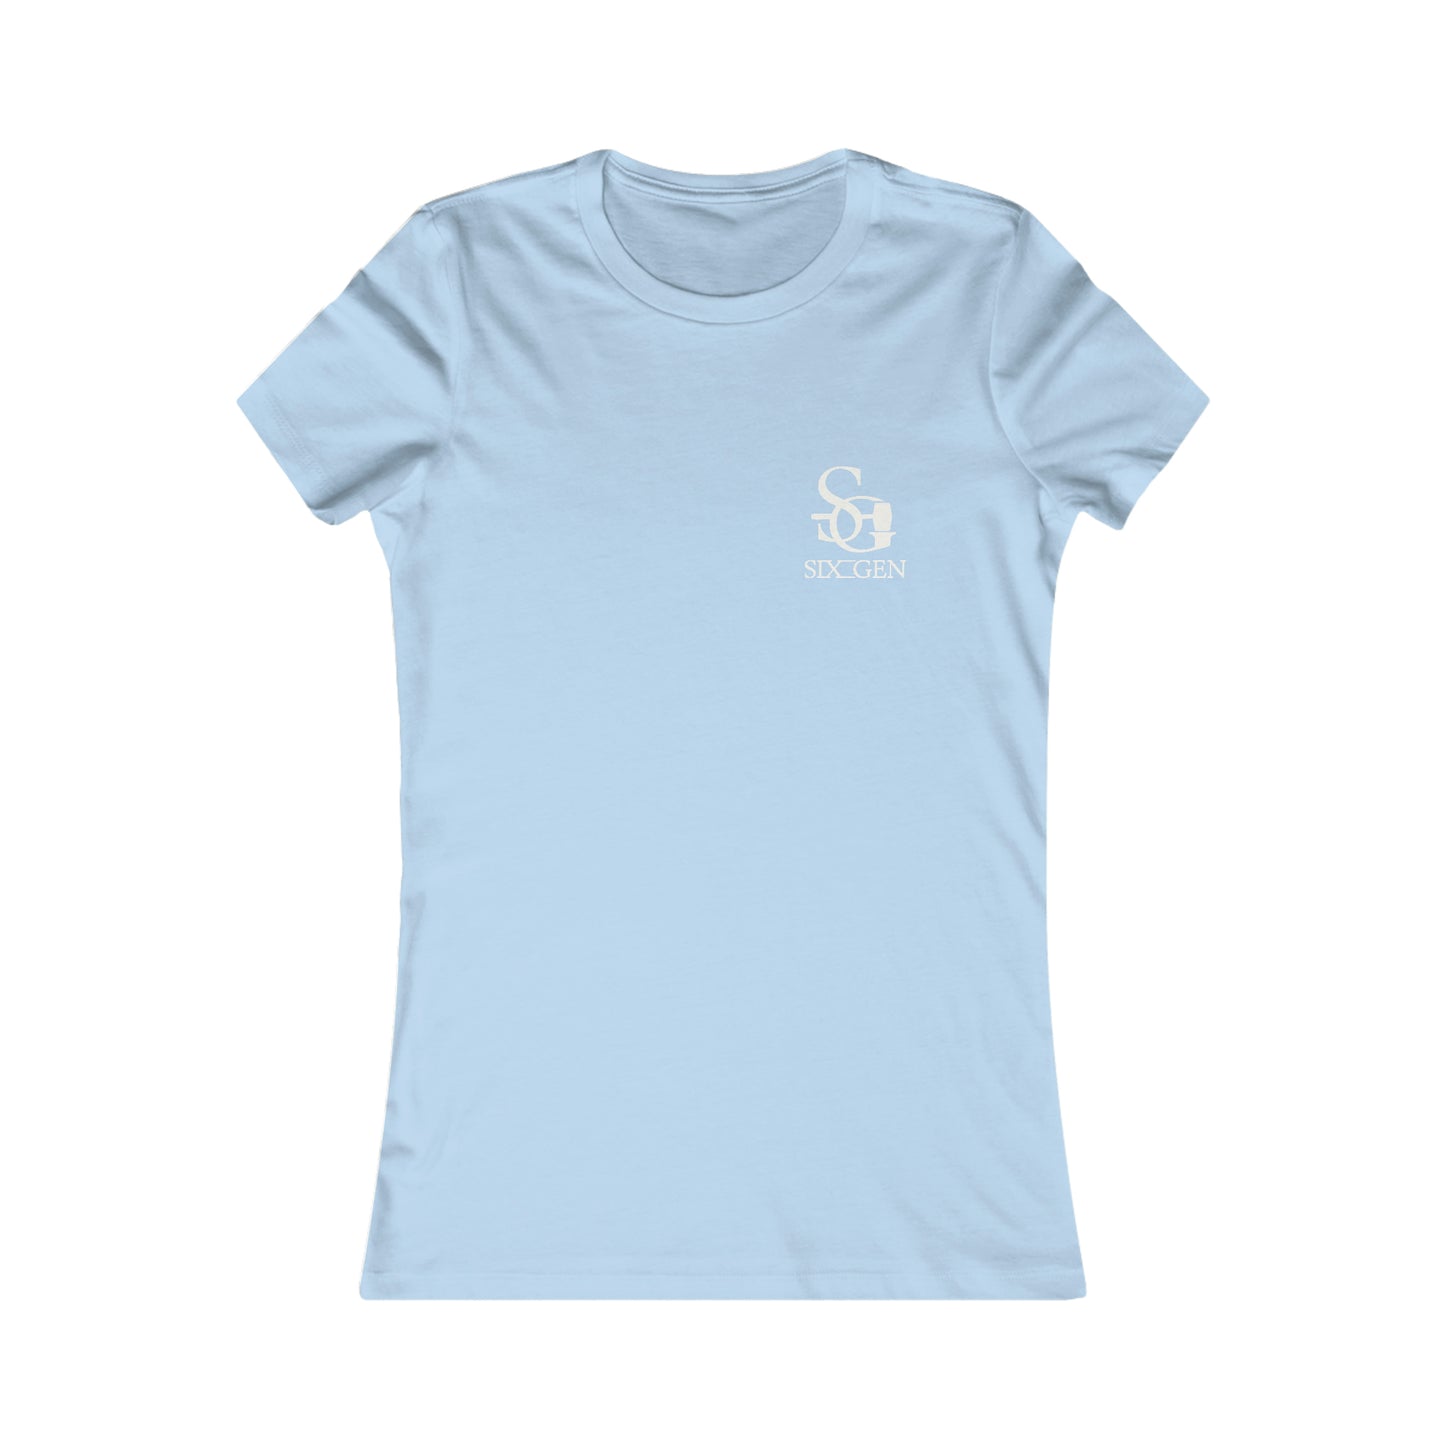 Women's Tee with Six-Gen Forge